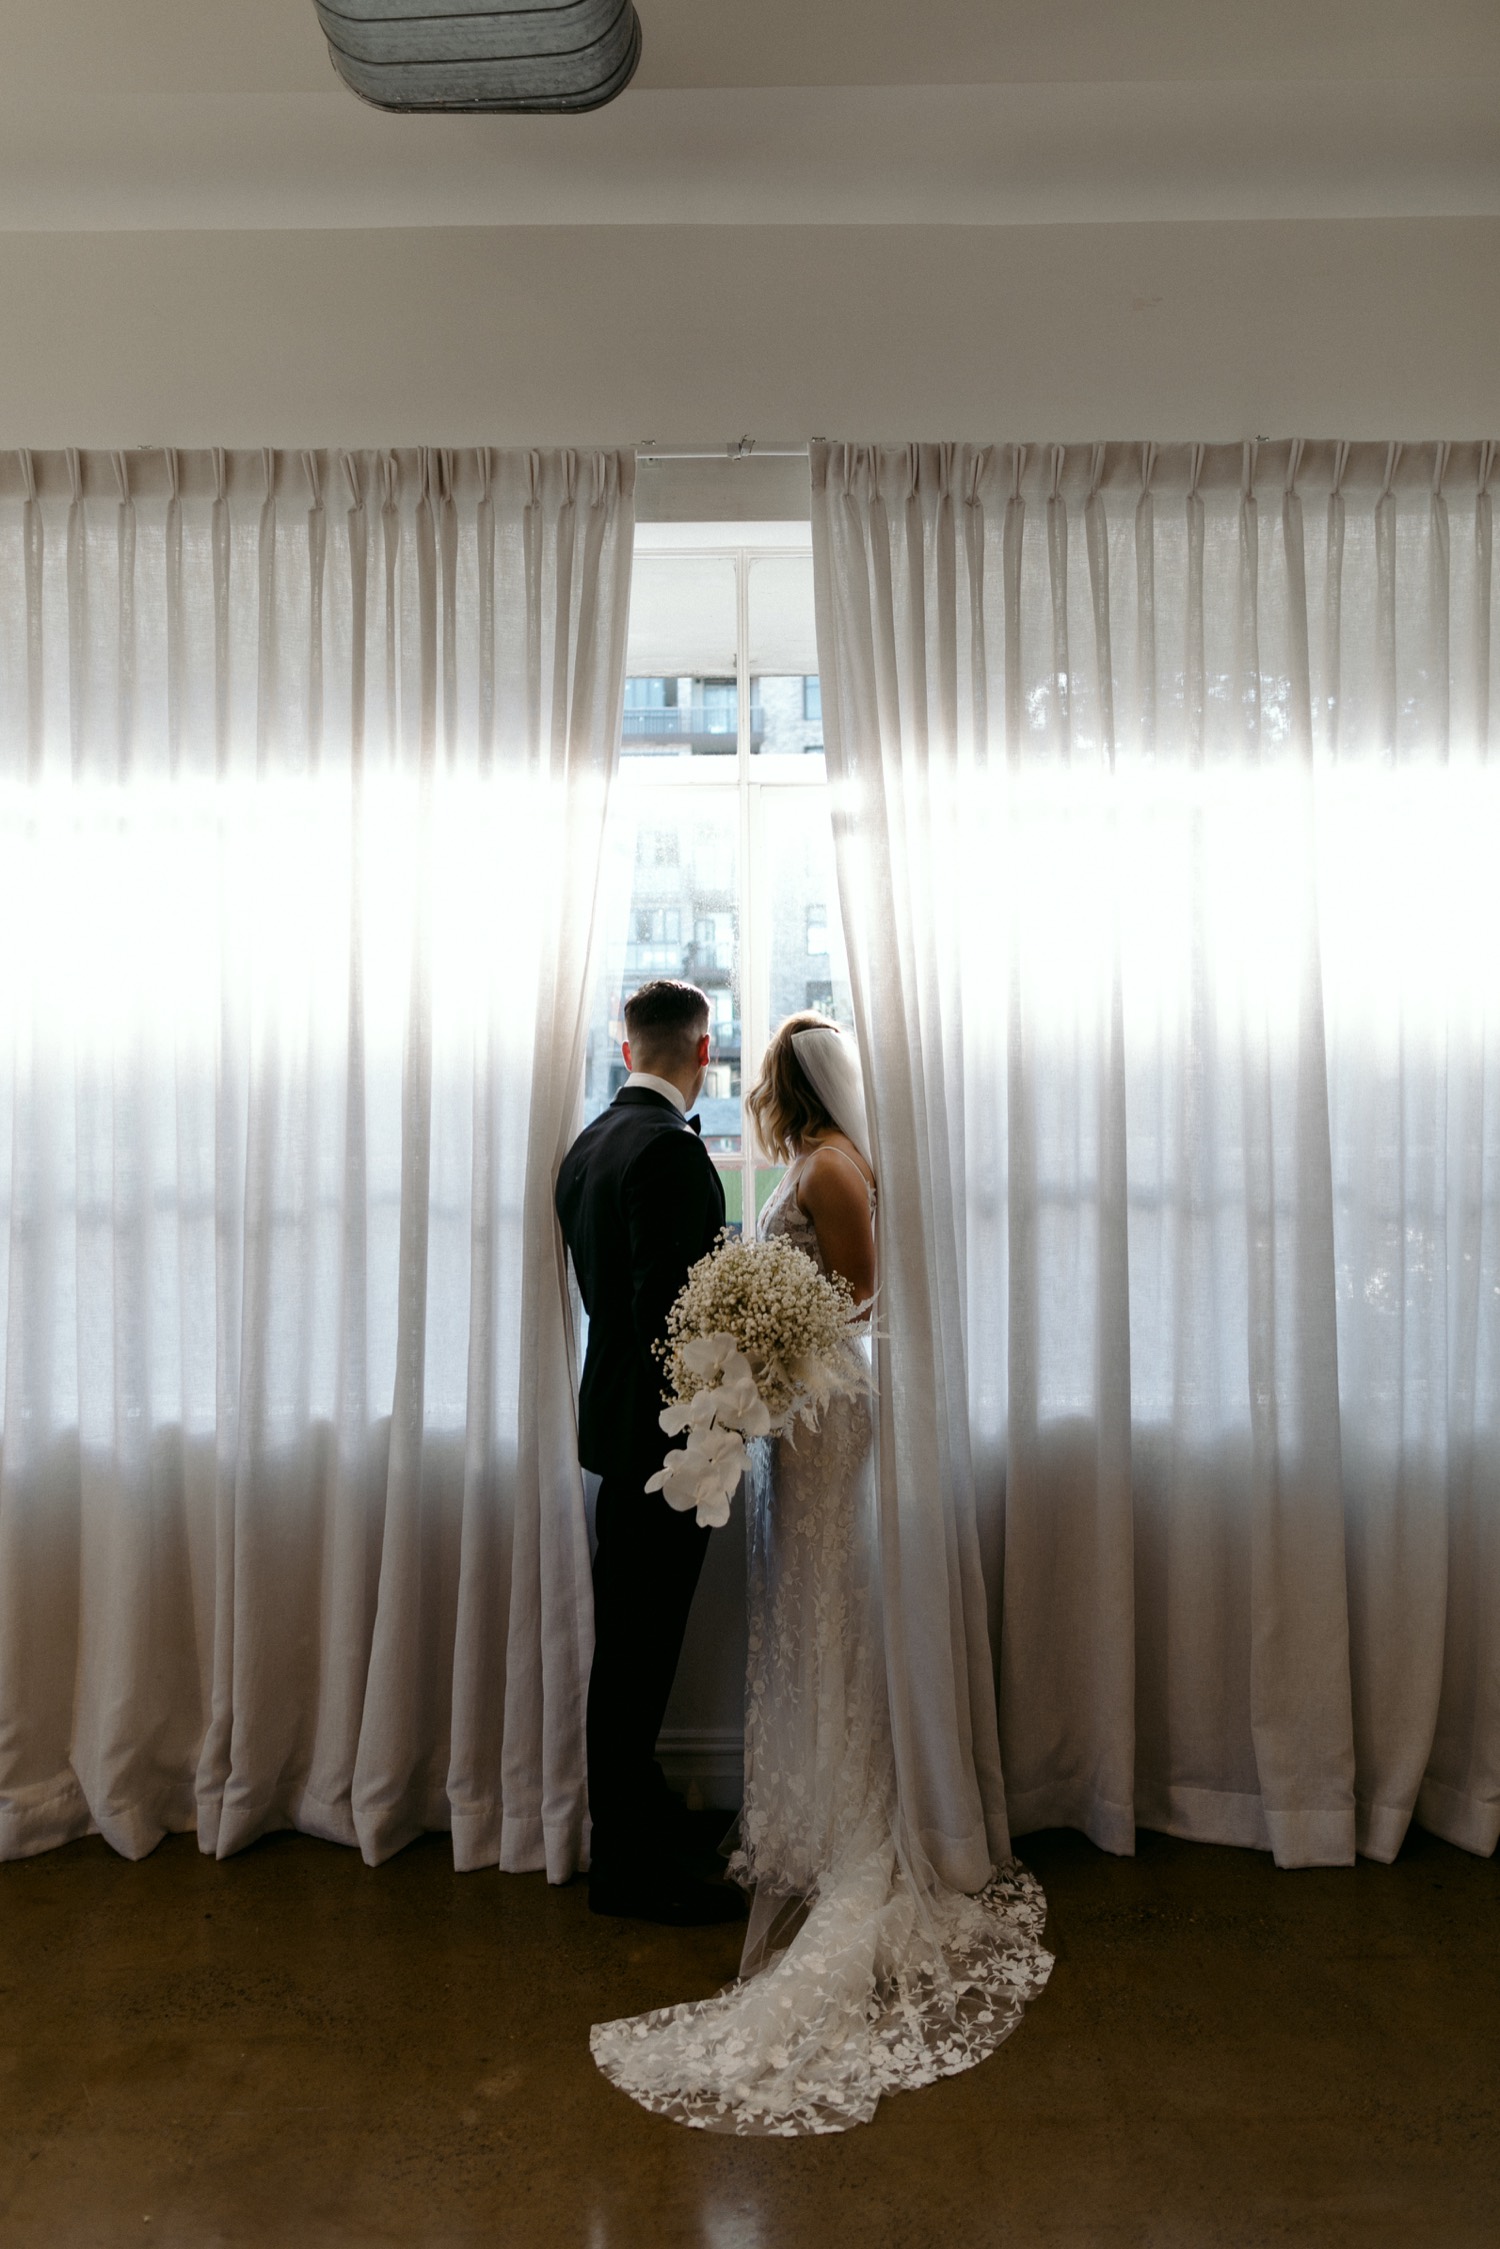 bride and groom looking out of la porte space window at guests below